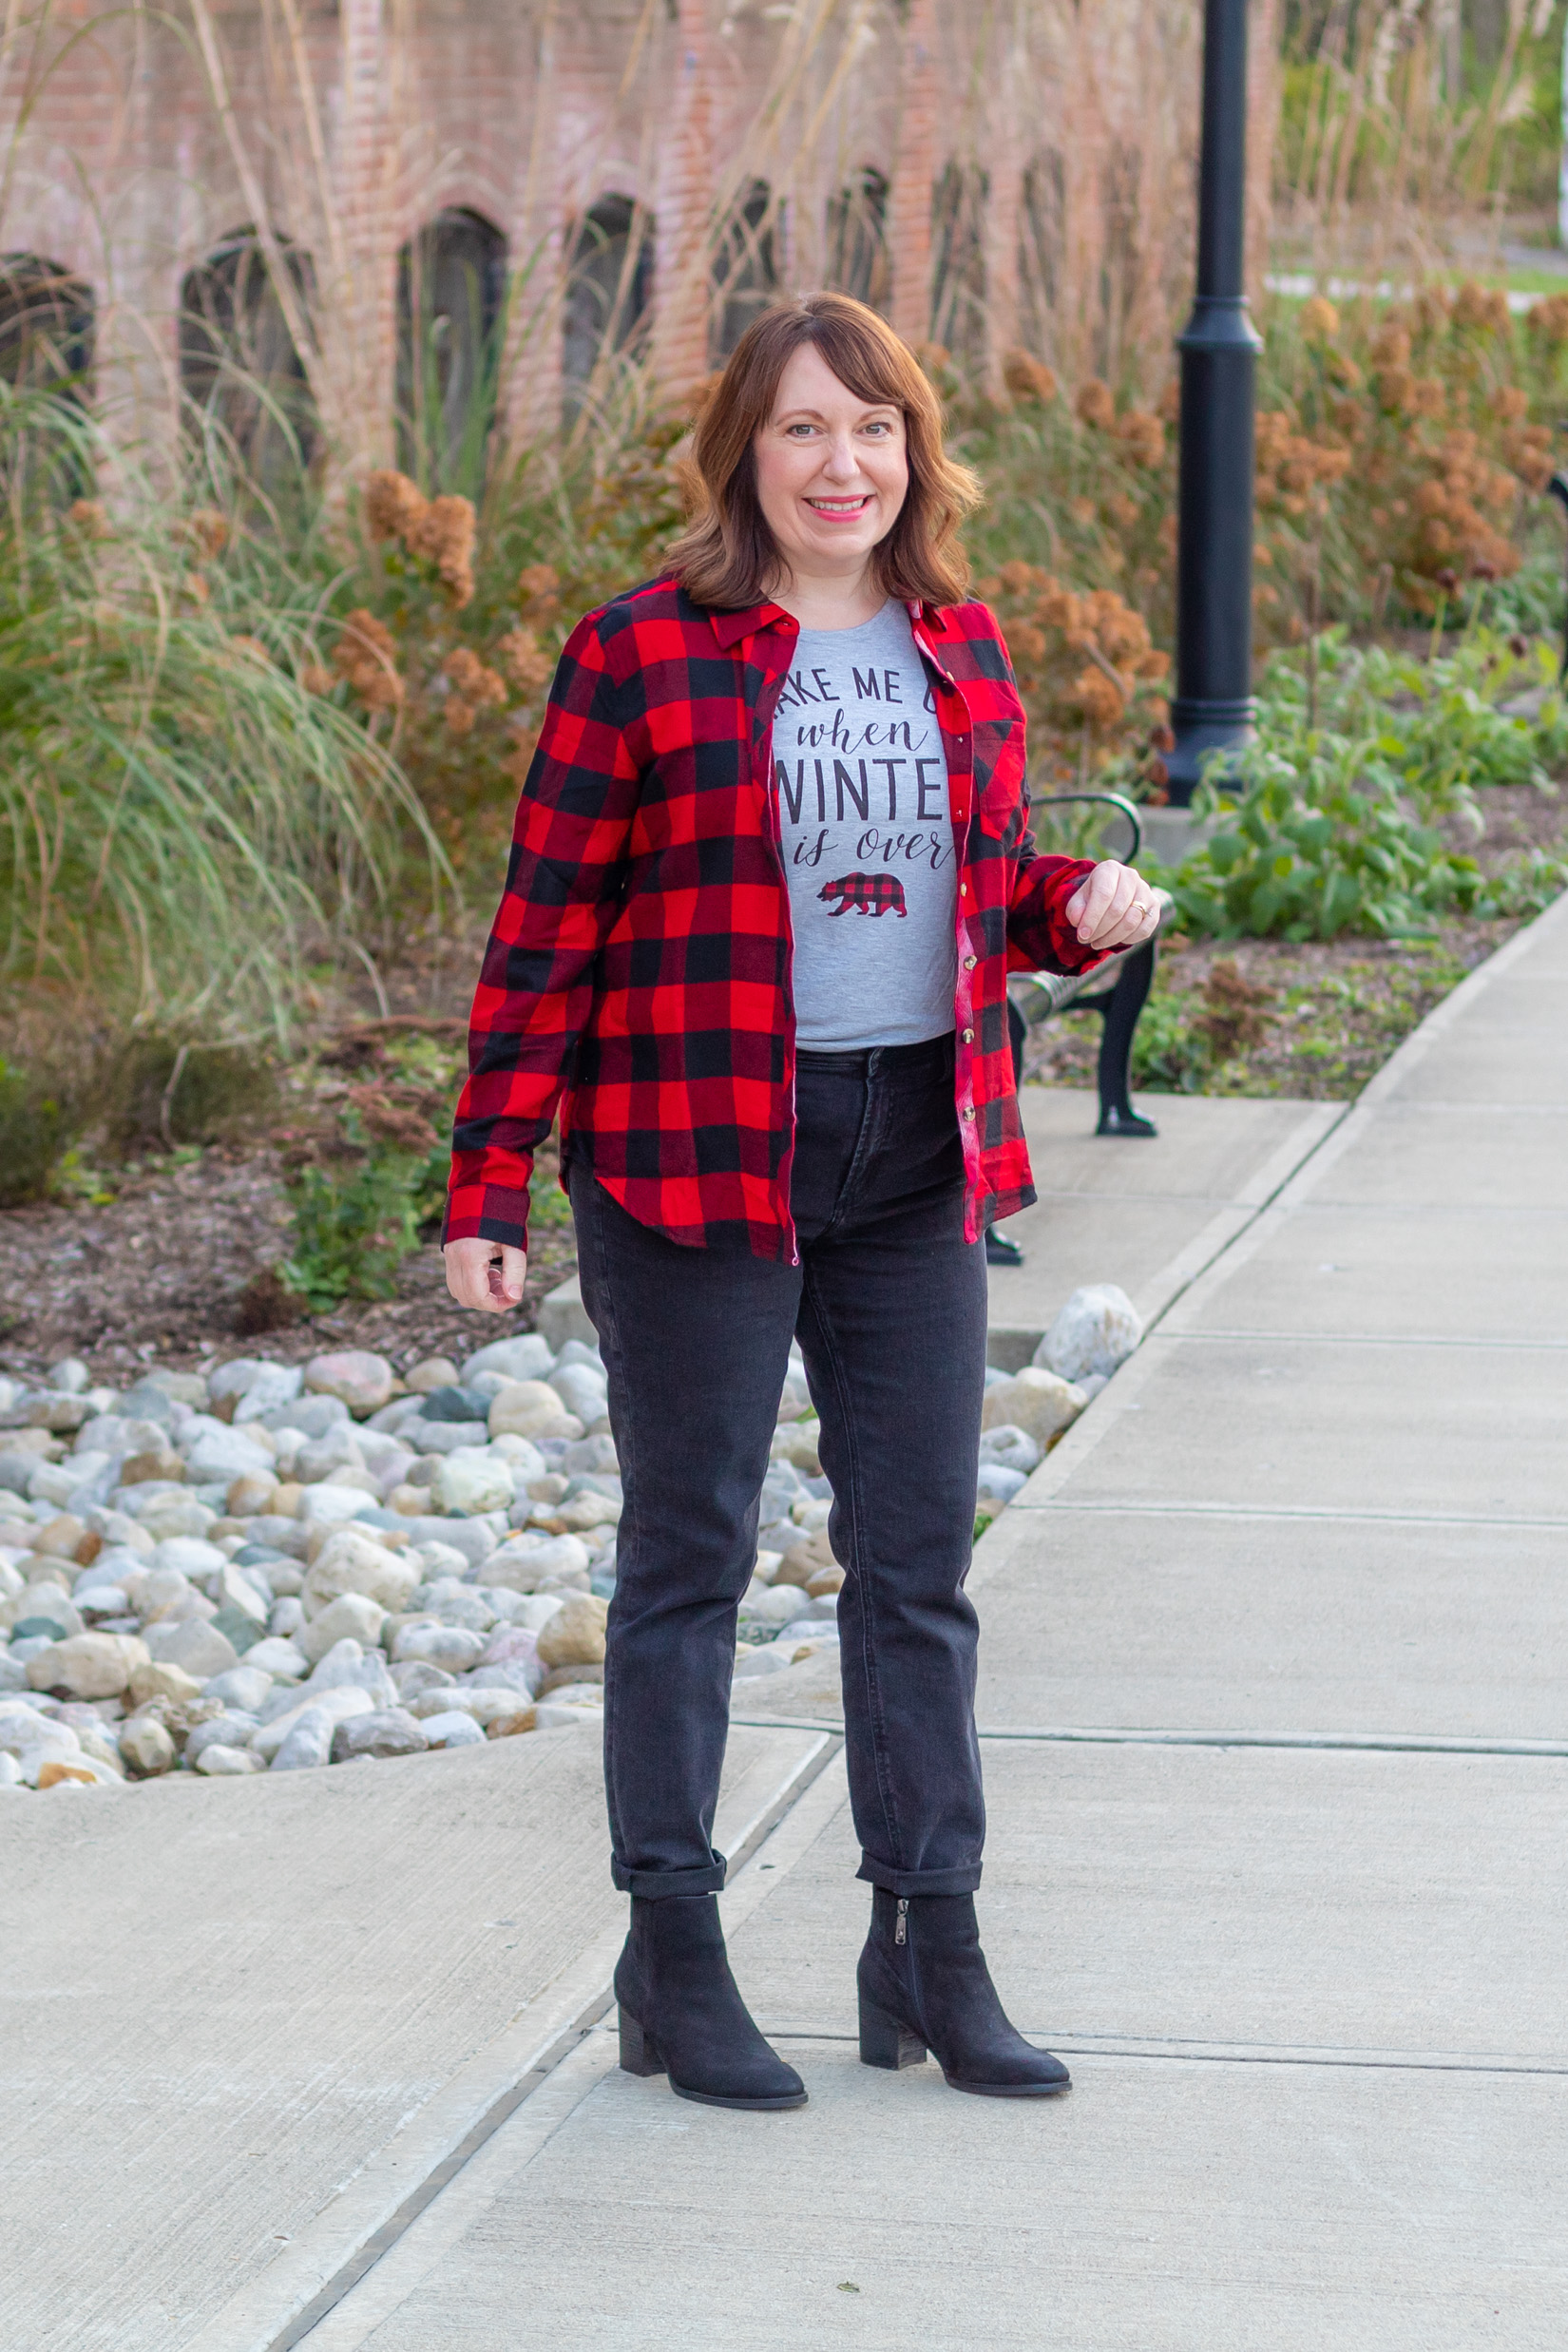 Graphic Tee/Plaid Shirt Outfit